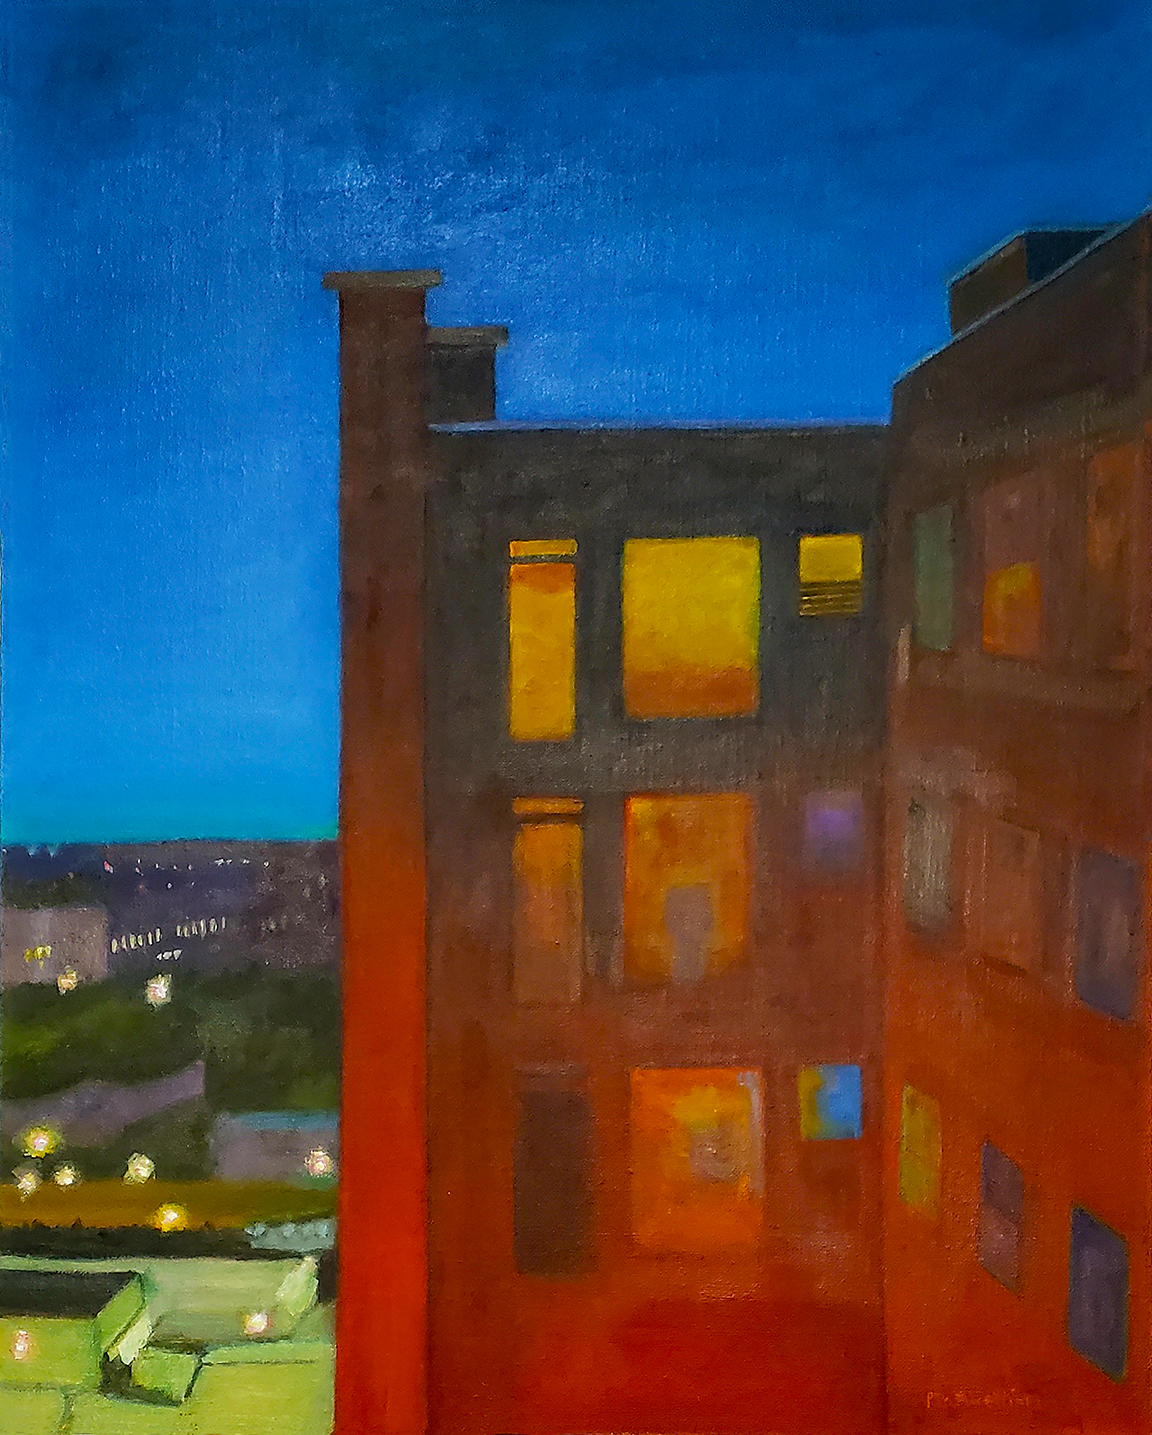 Apartments at Night Oil on Linen Panel 16x20